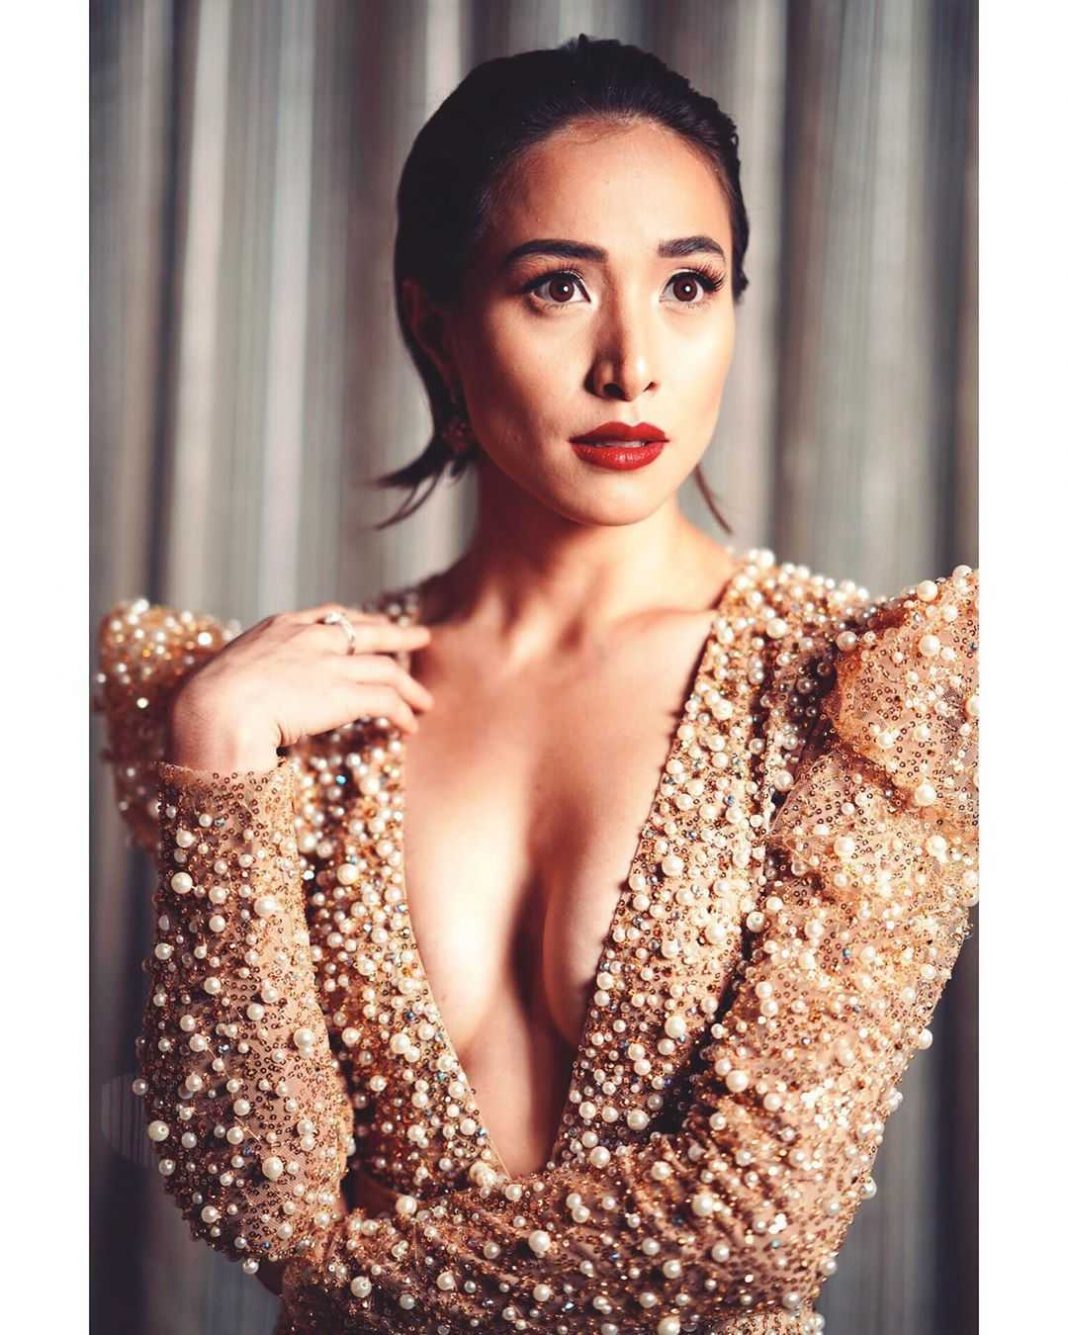 51 Cristine Reyes Nude Pictures Present Her Wild Side Glamor 14